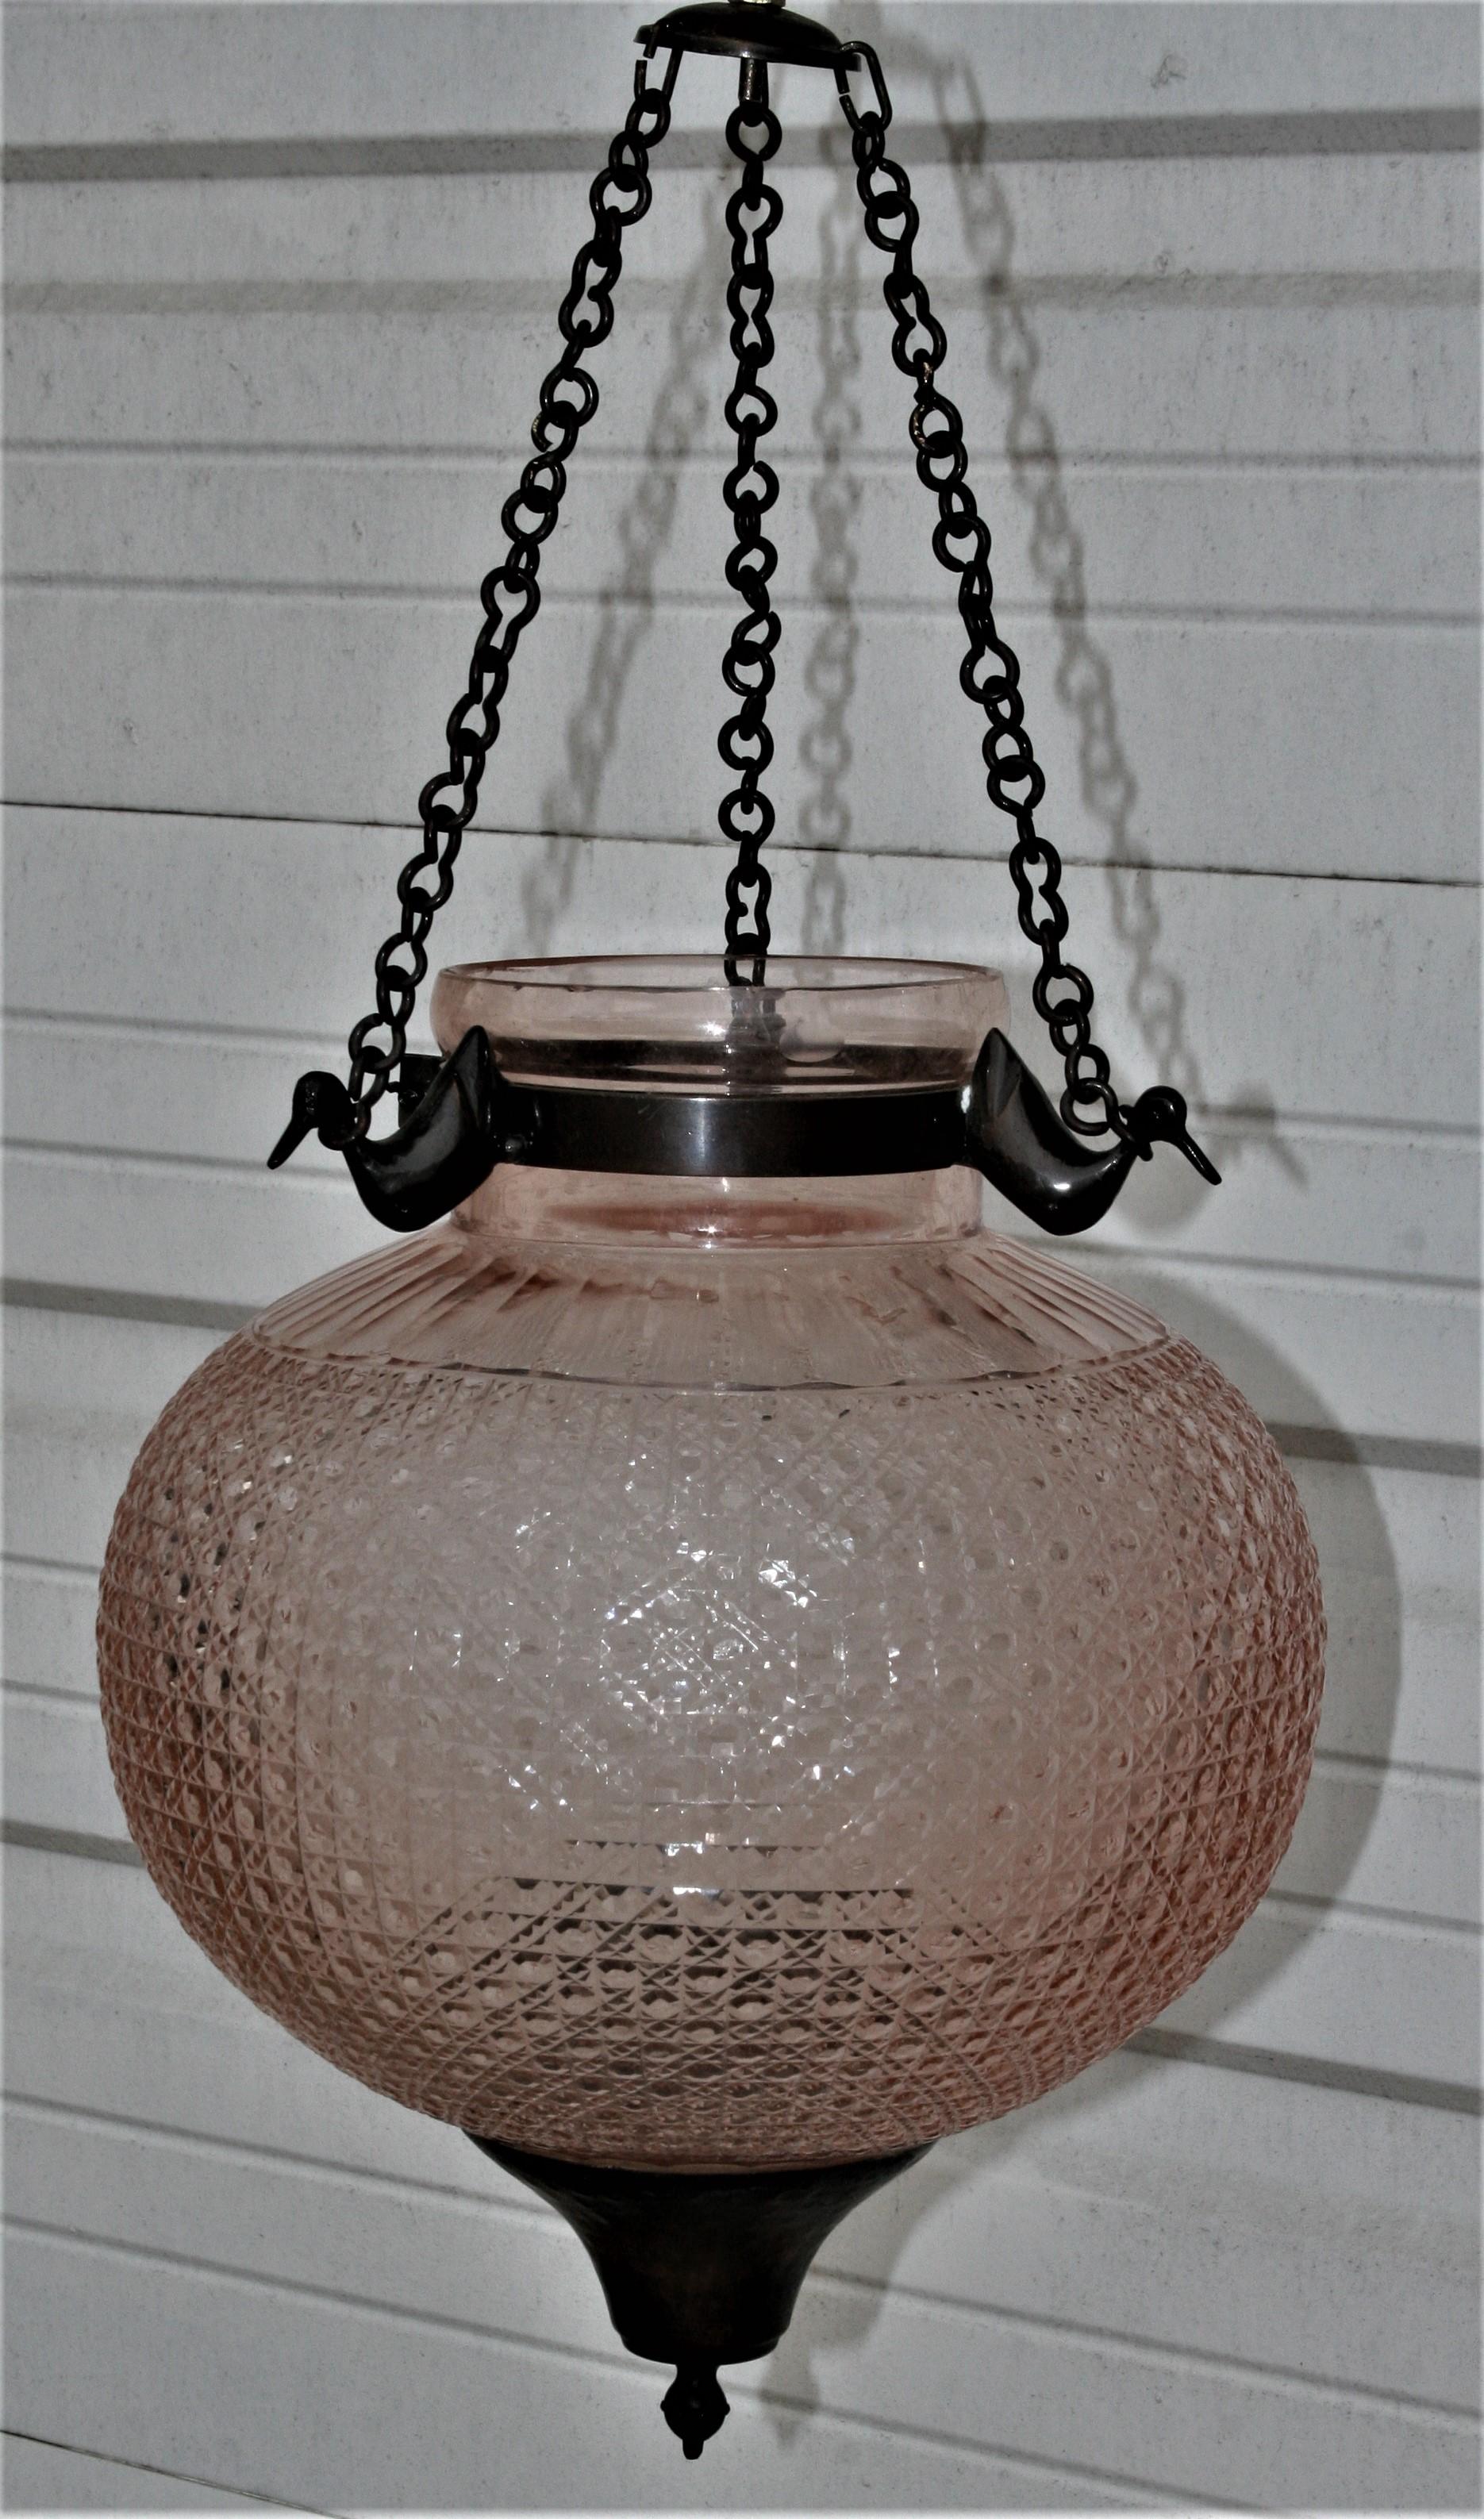 A large dome shaped handcut crystal glass hanging lantern. The Fine handcut on the crystal and the dreamy champagne shade on the globe make this an extraordinary piece. Three hand forged iron chains hold the crystal globe through three brass ducks